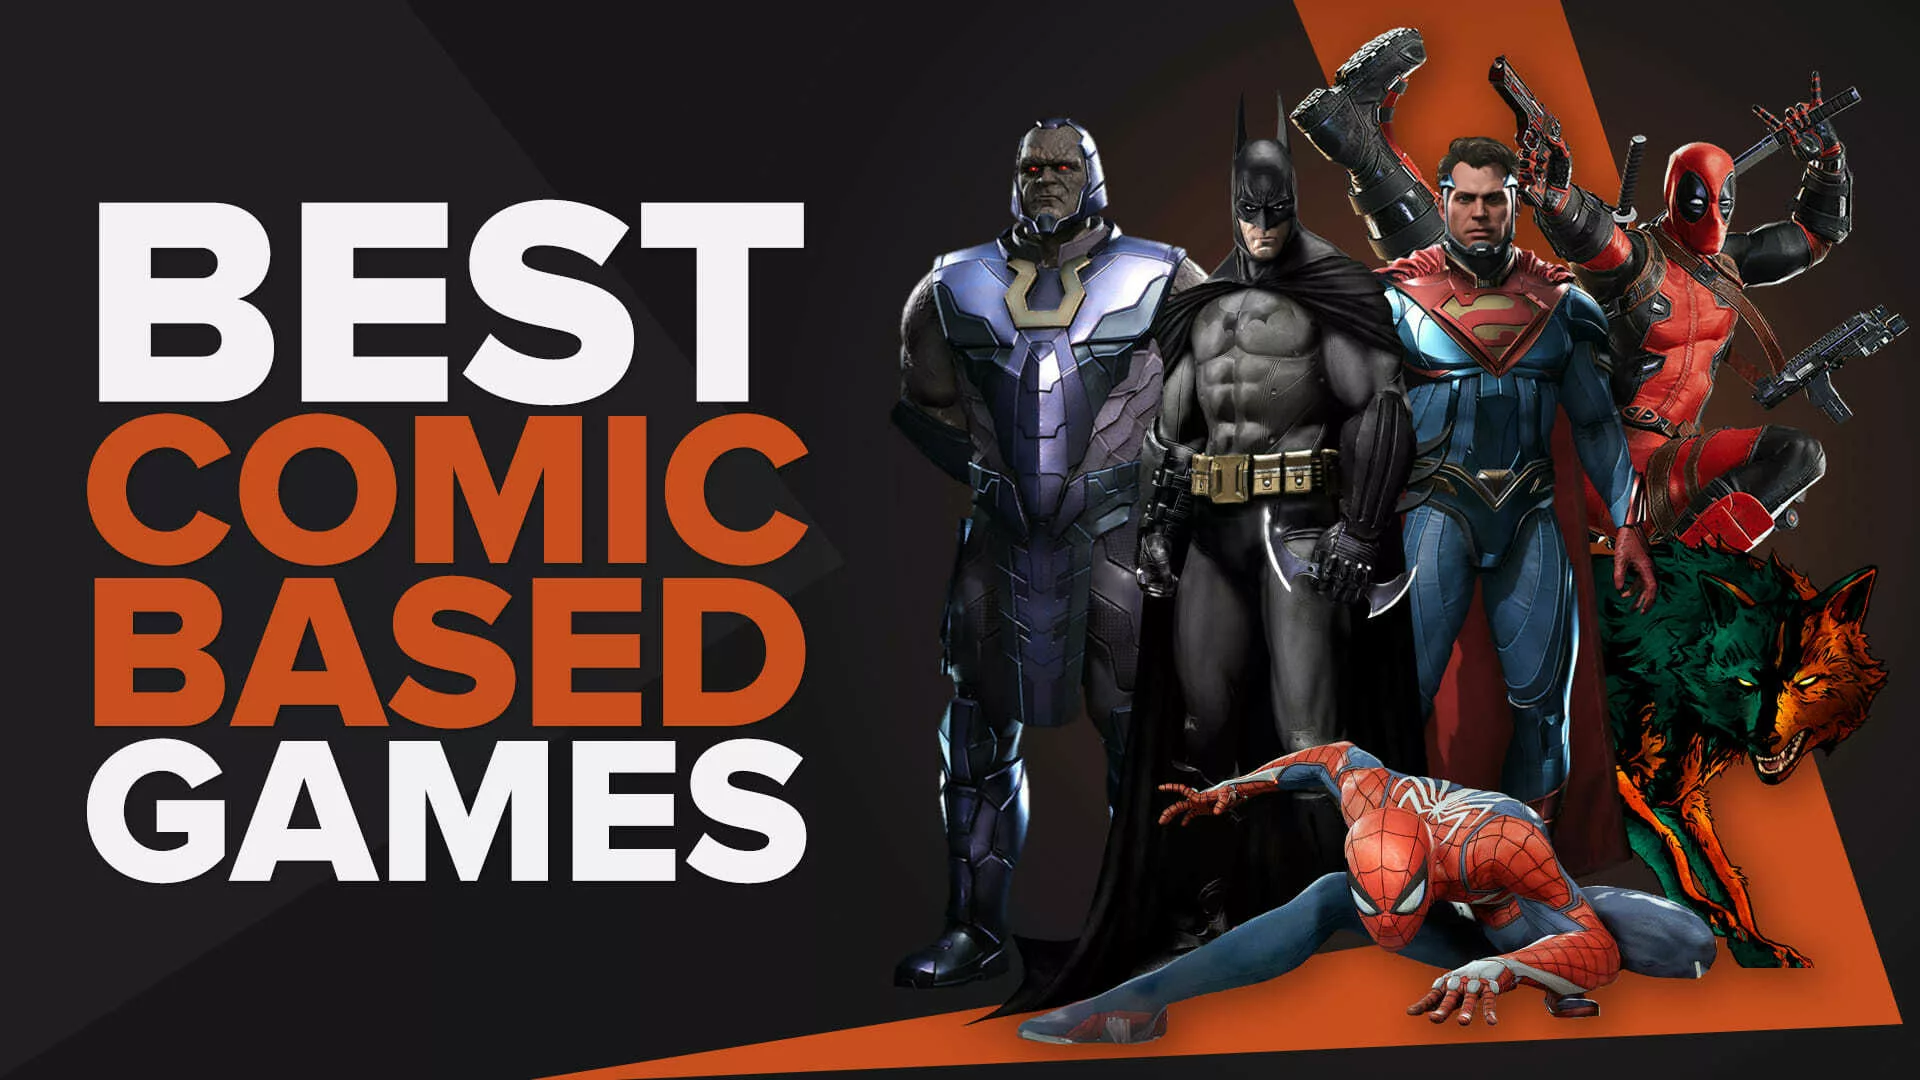 The Top 10 Best Video Games Based On Comics